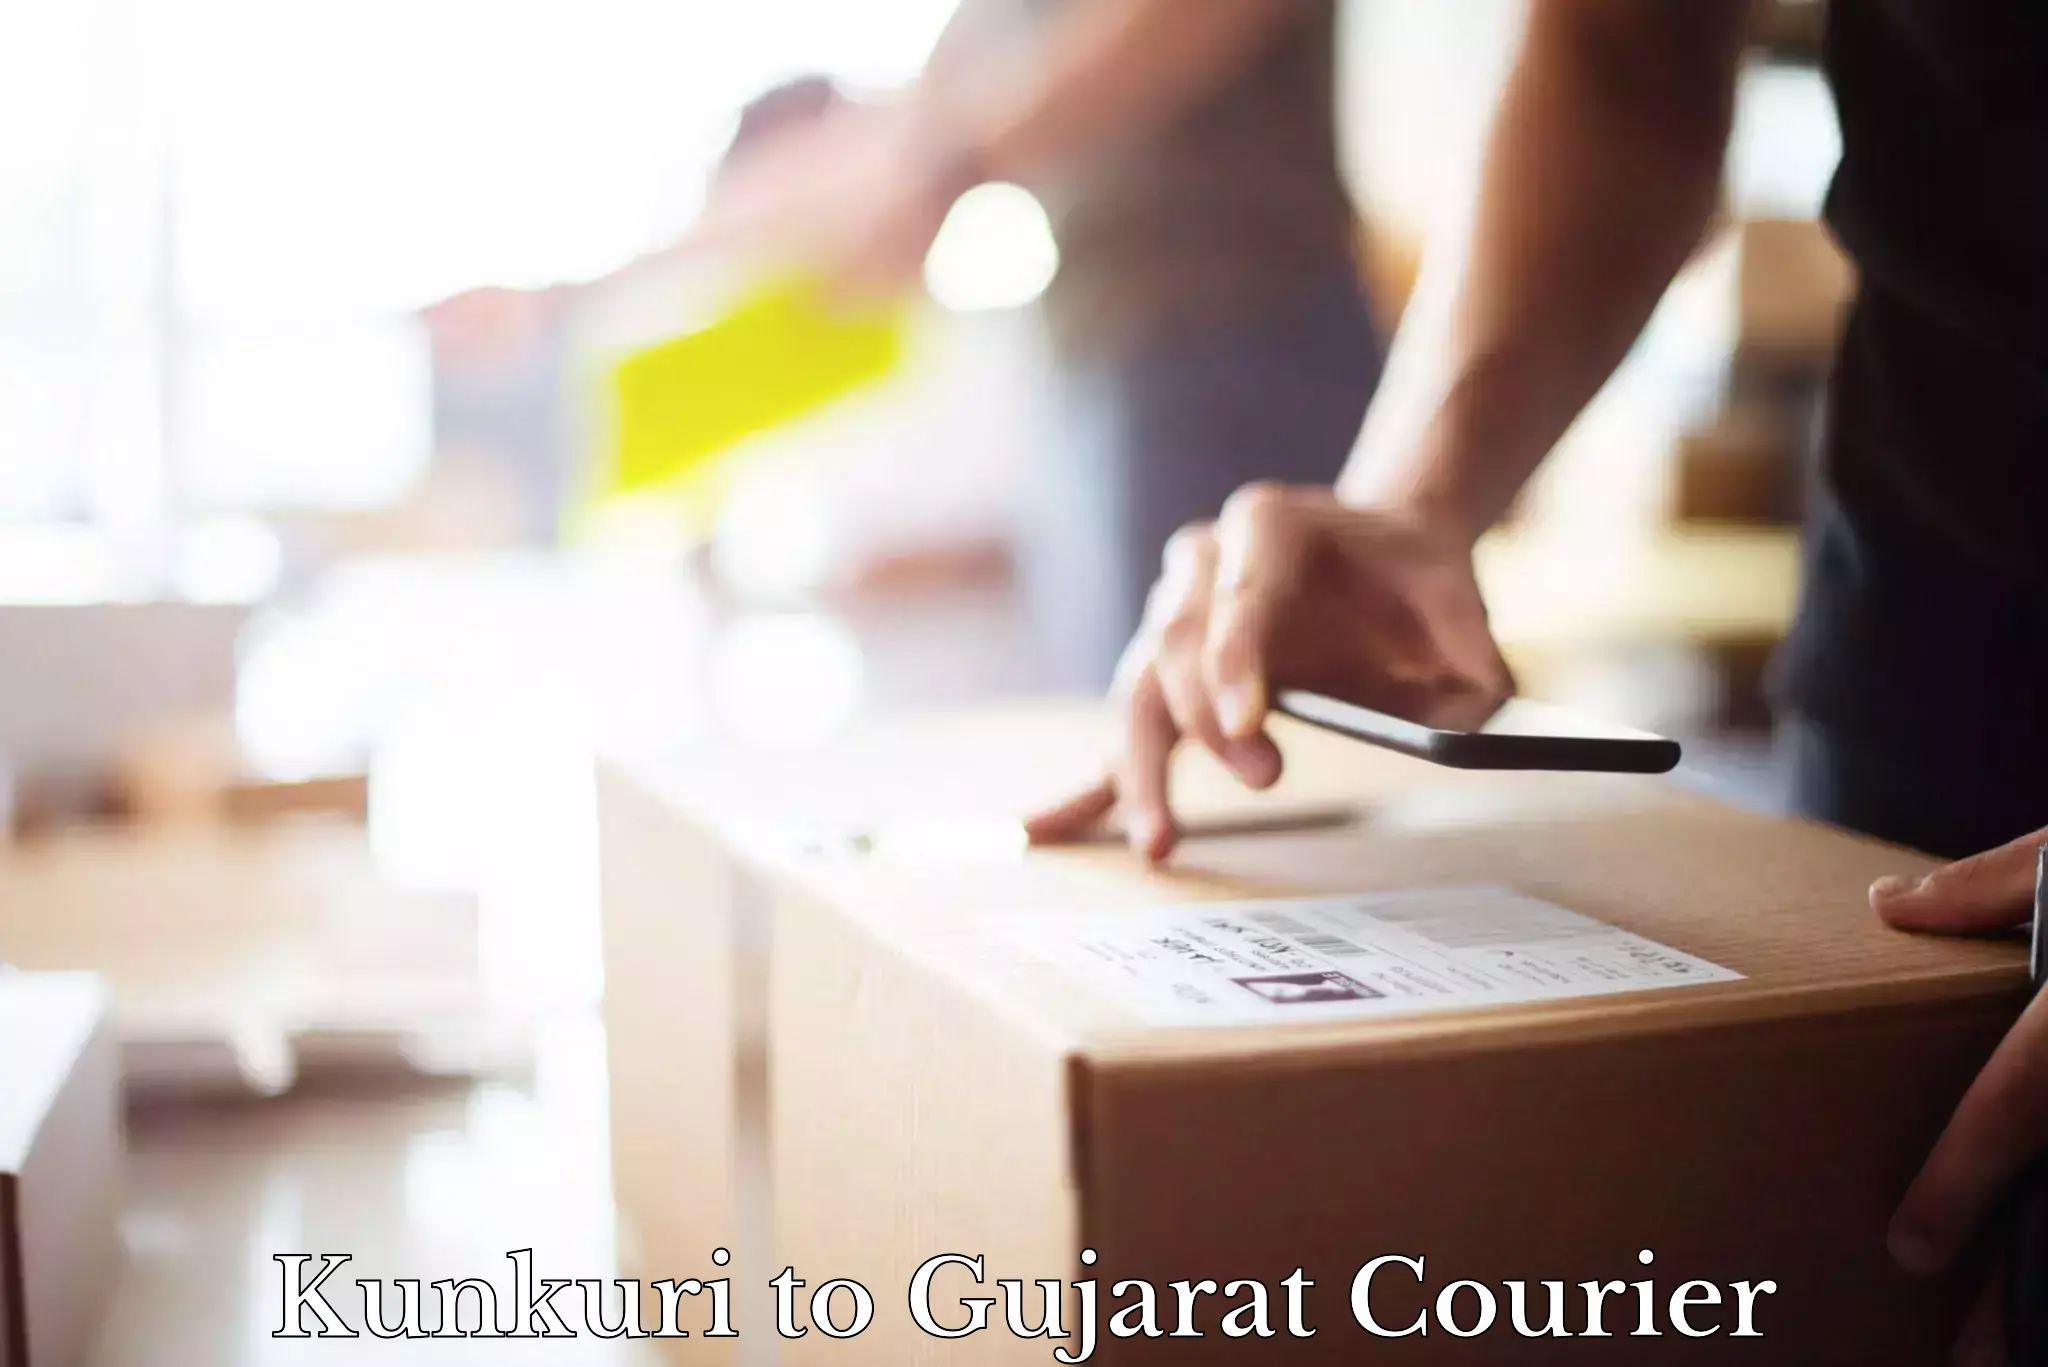 Reliable delivery network Kunkuri to Gujarat